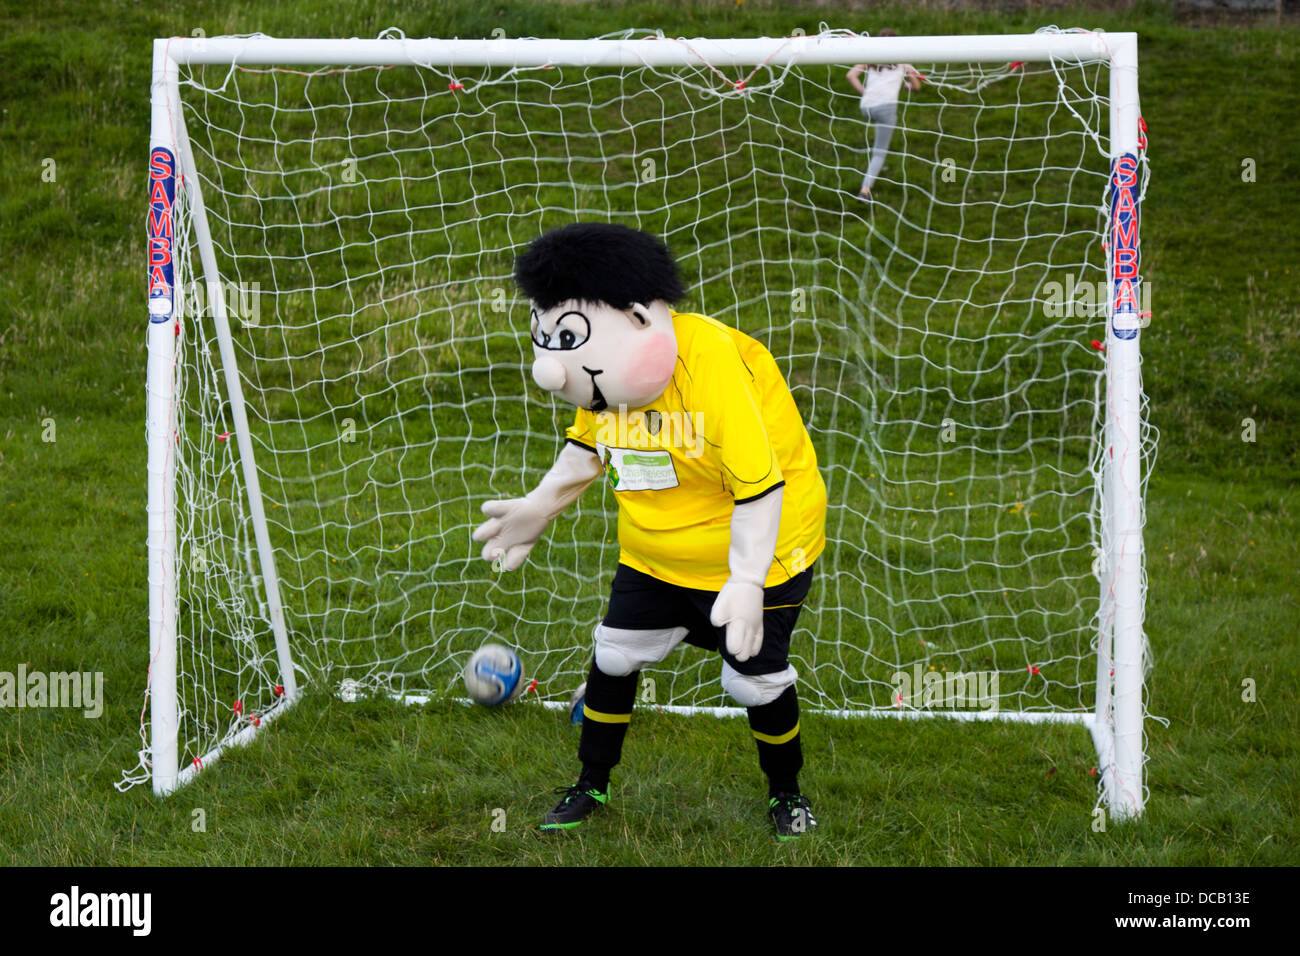 Billy Brewer the Burton Albion Mascot in goal at a Charity event at Tutbury Castle, Staffordshire, England, UK Stock Photo